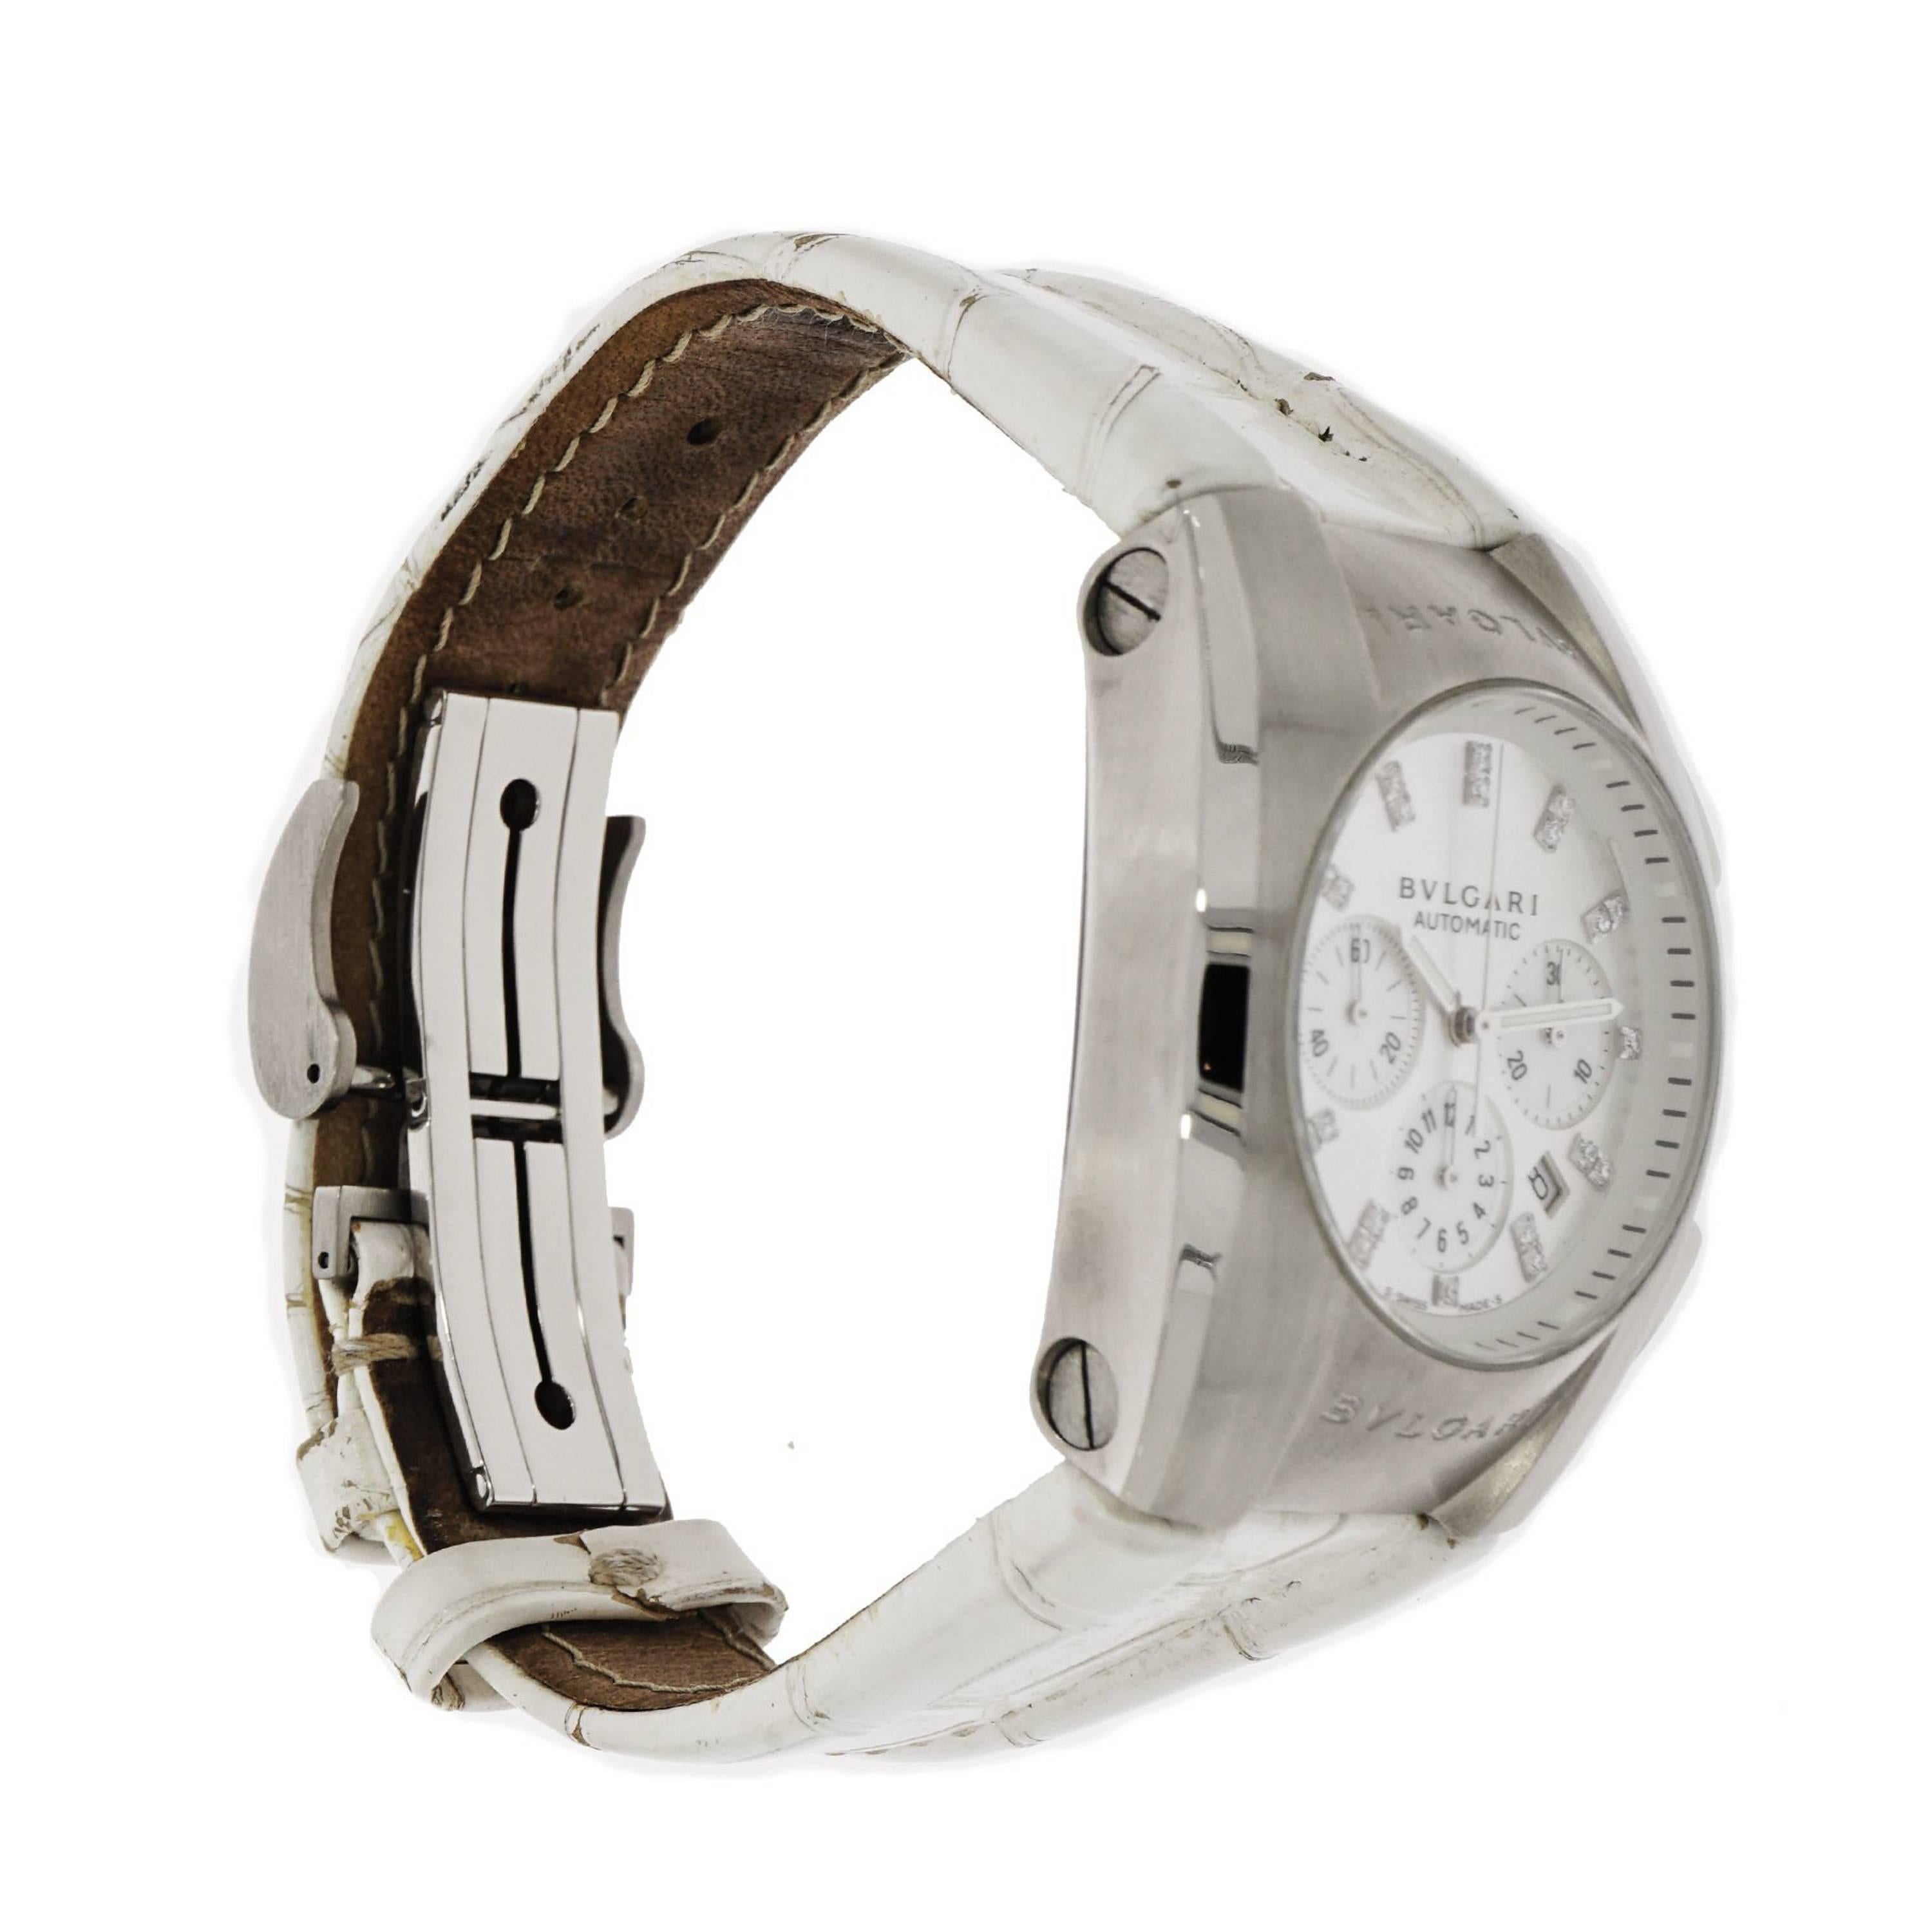 This timepiece features a self-winding movement with indications for the Hours, Minutes, Small Seconds, Date and 12-Hour Chronograph. Features a beautiful Mother of Pearl Dial set with diamonds in the hour markers.  
The case measures 35mm in